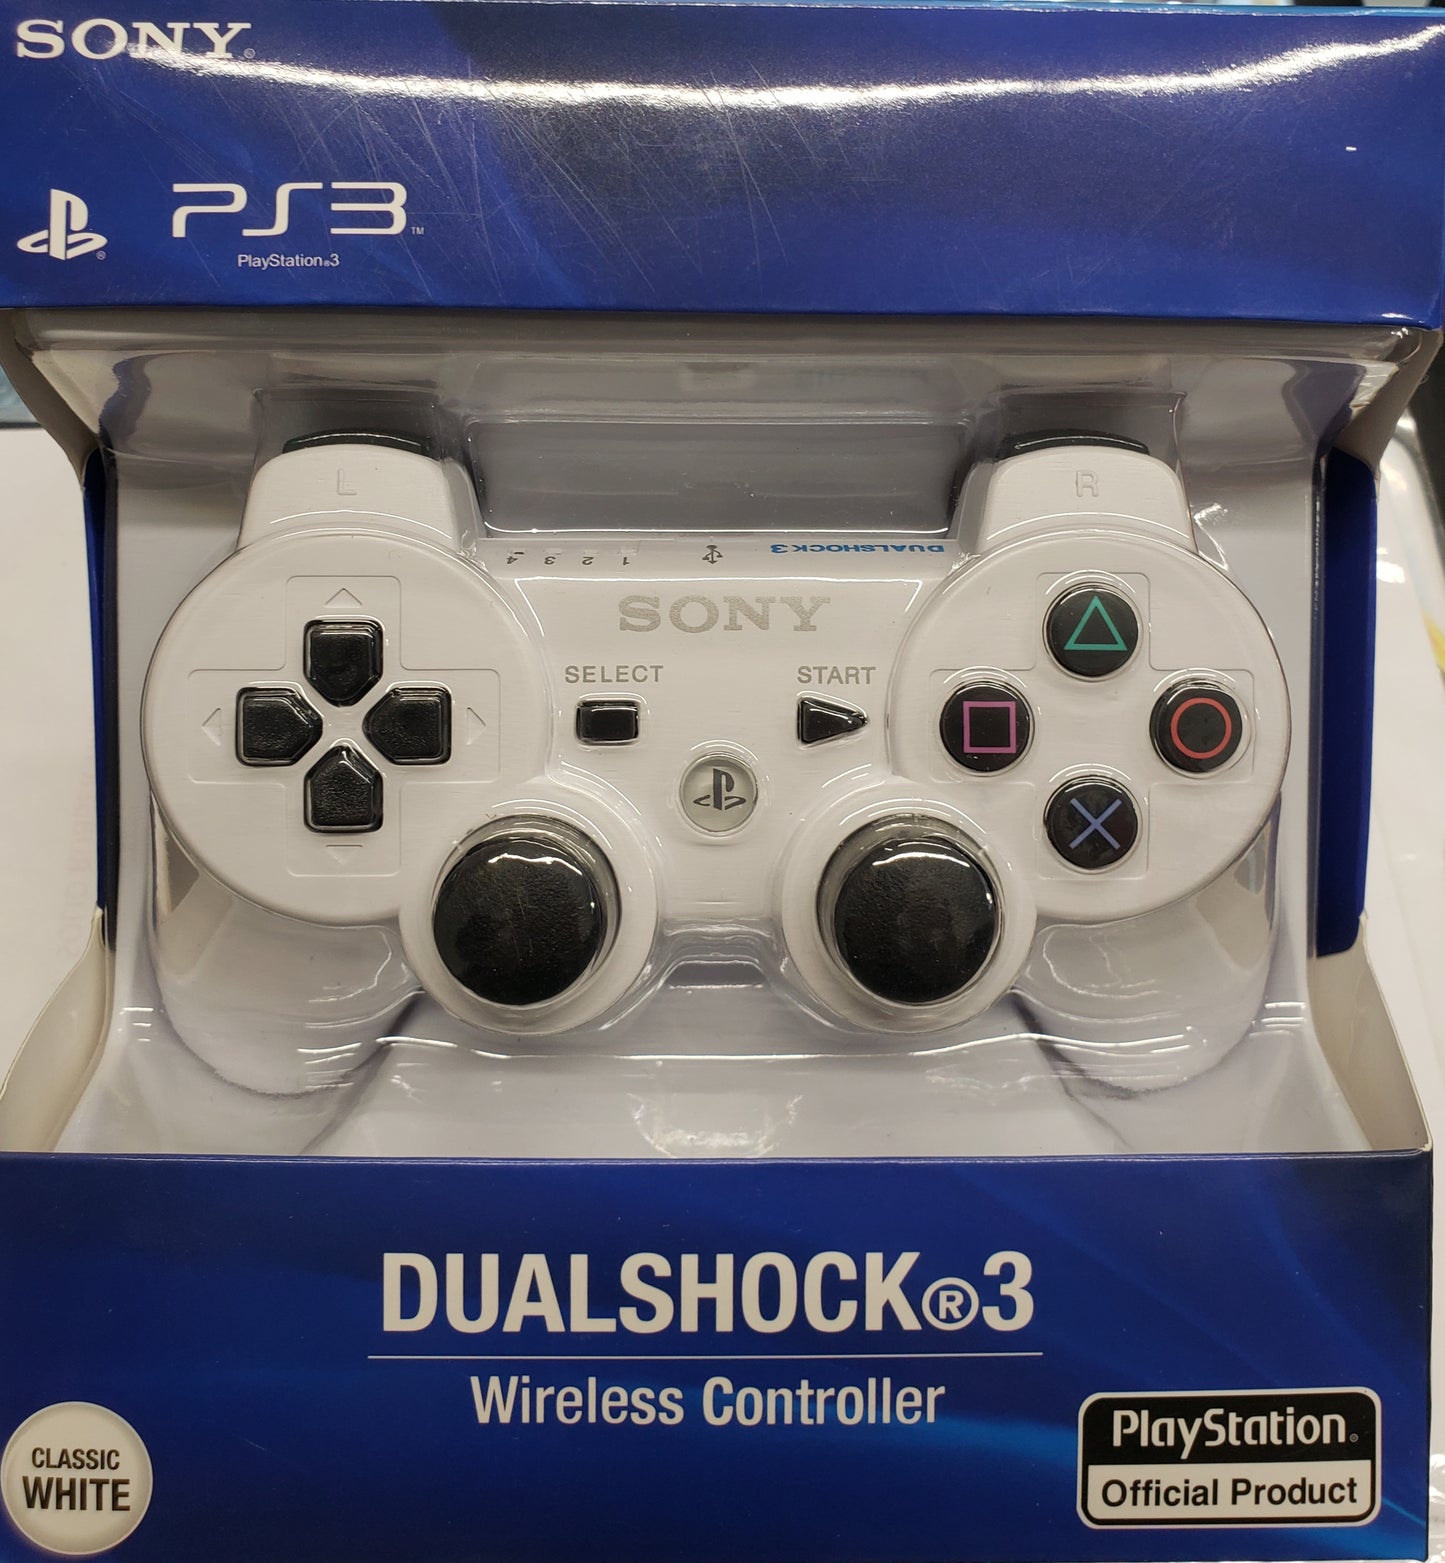 PS3 DualShock 3 Controllers